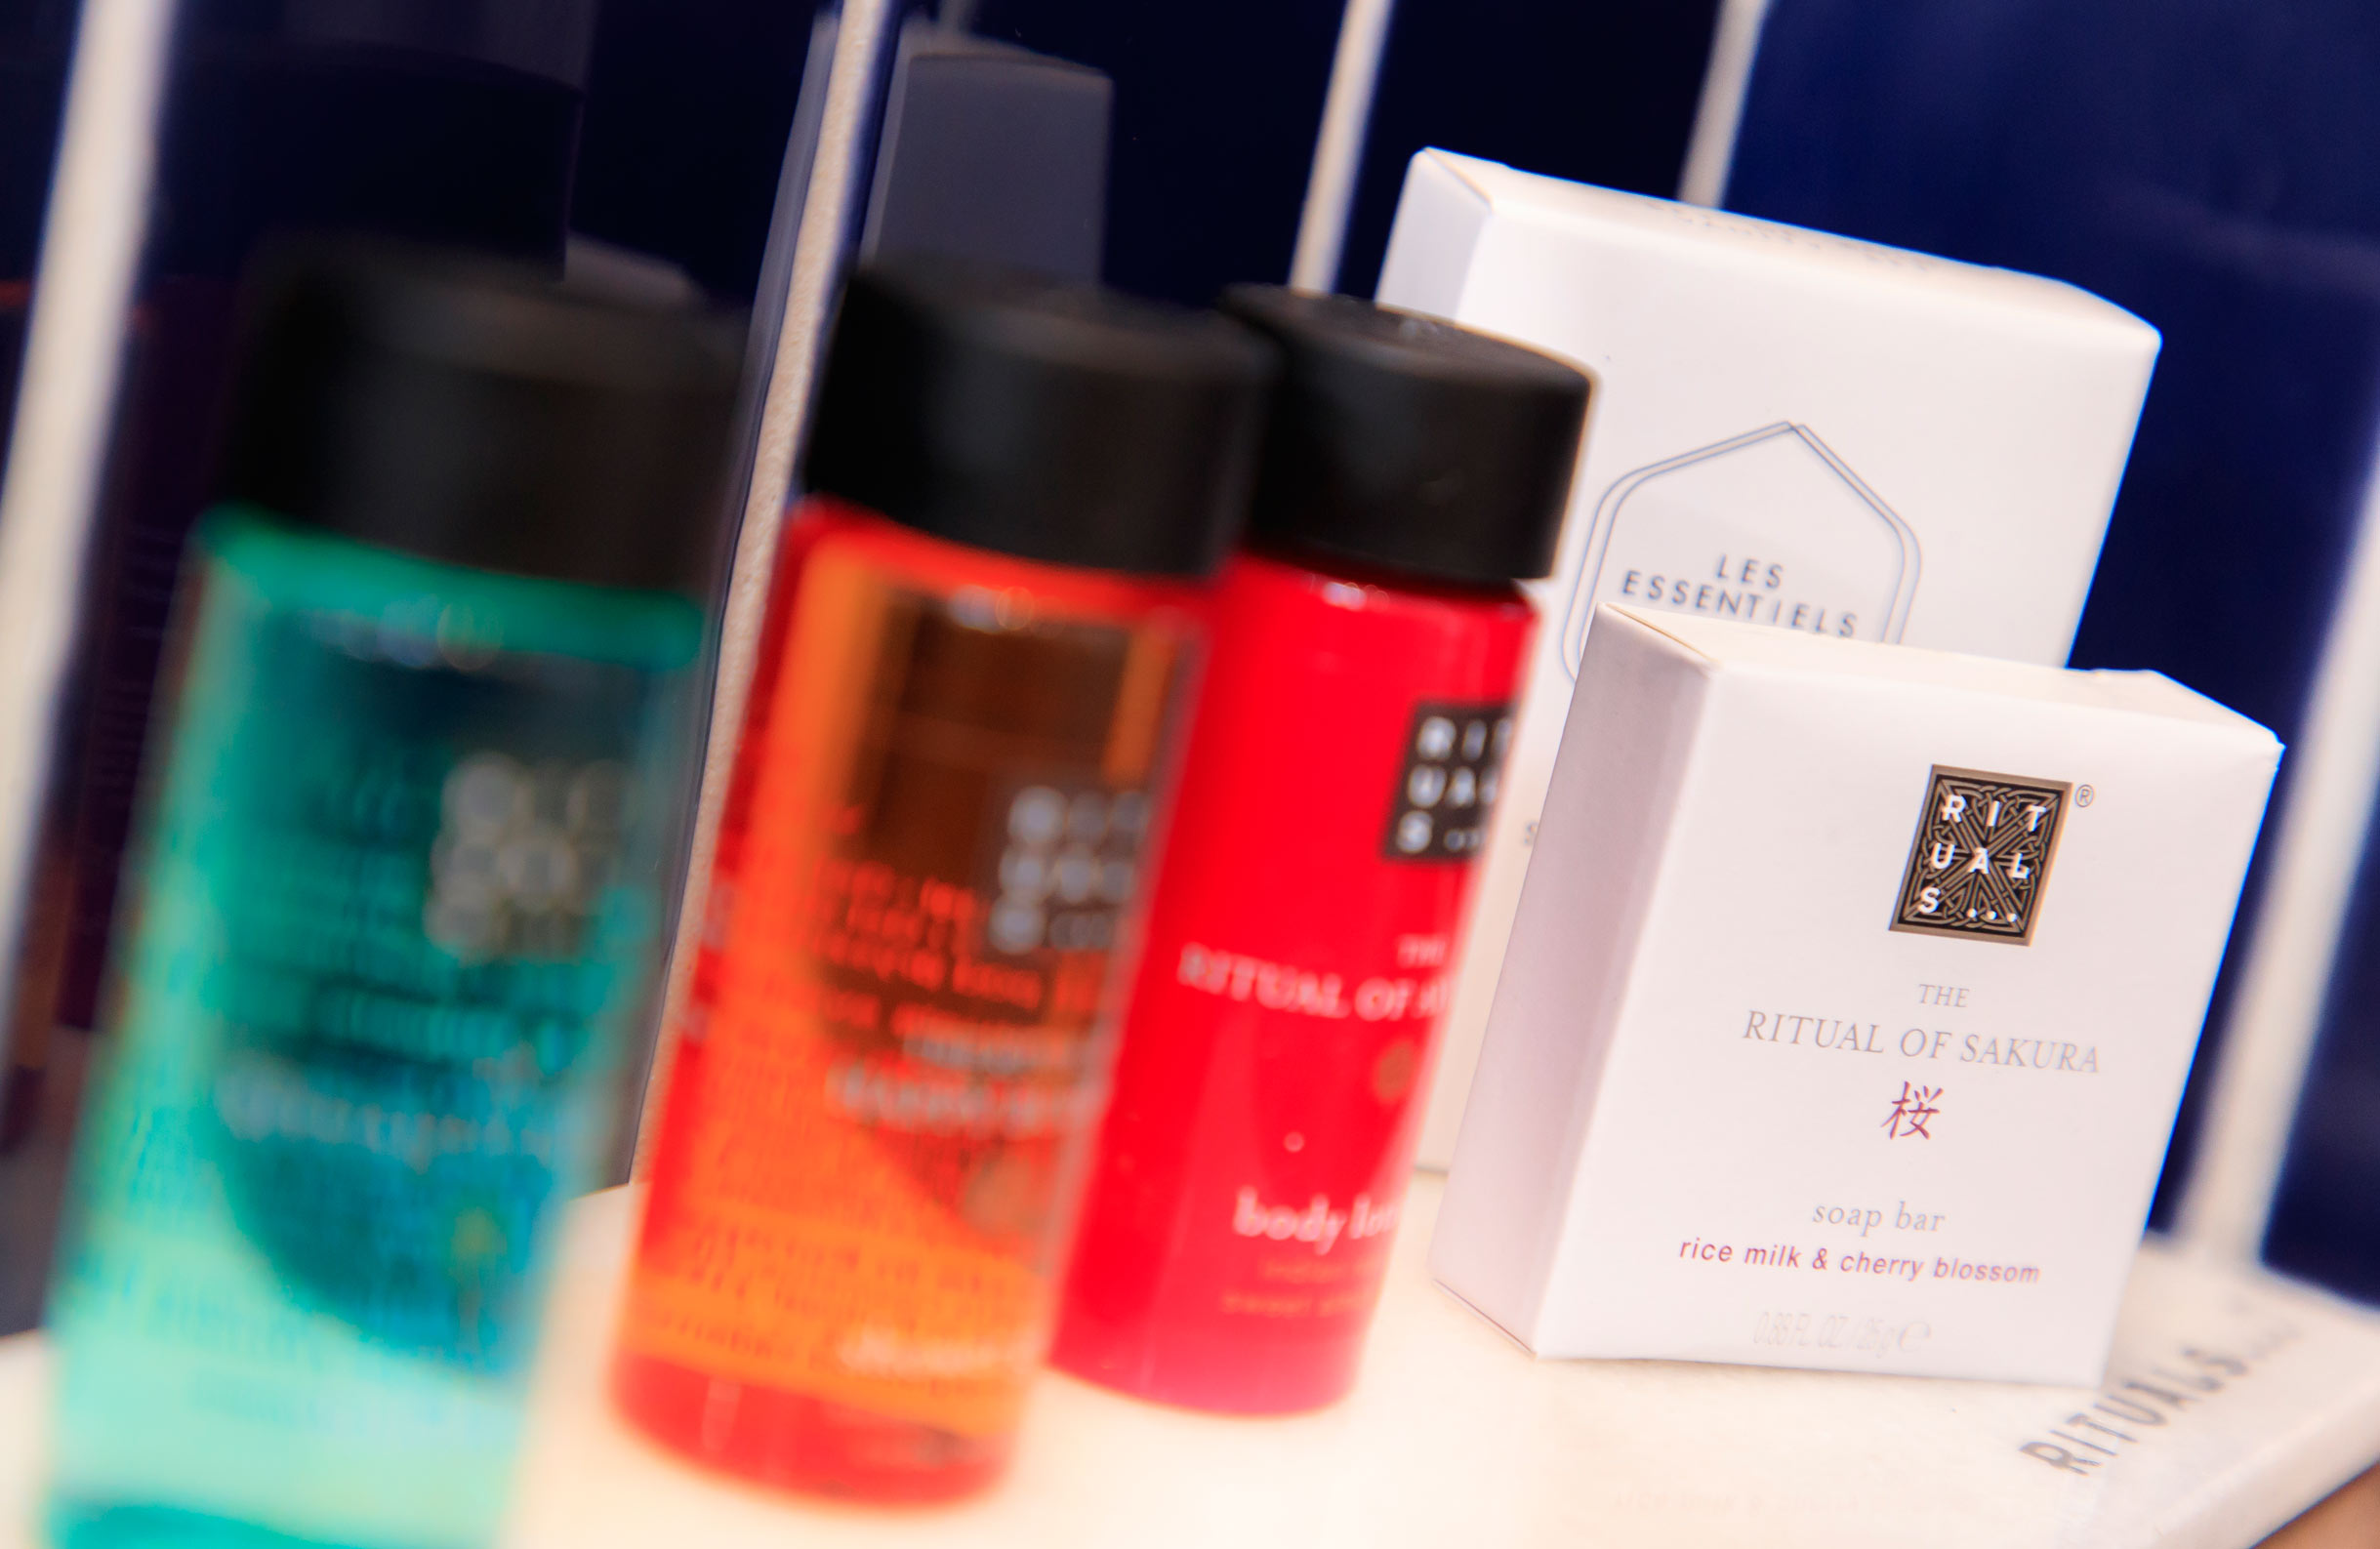 Luxury-branded complimentary toiletries add a layer of indulgence to your weekend break at Villa Varentia boutique B&B near Amiens